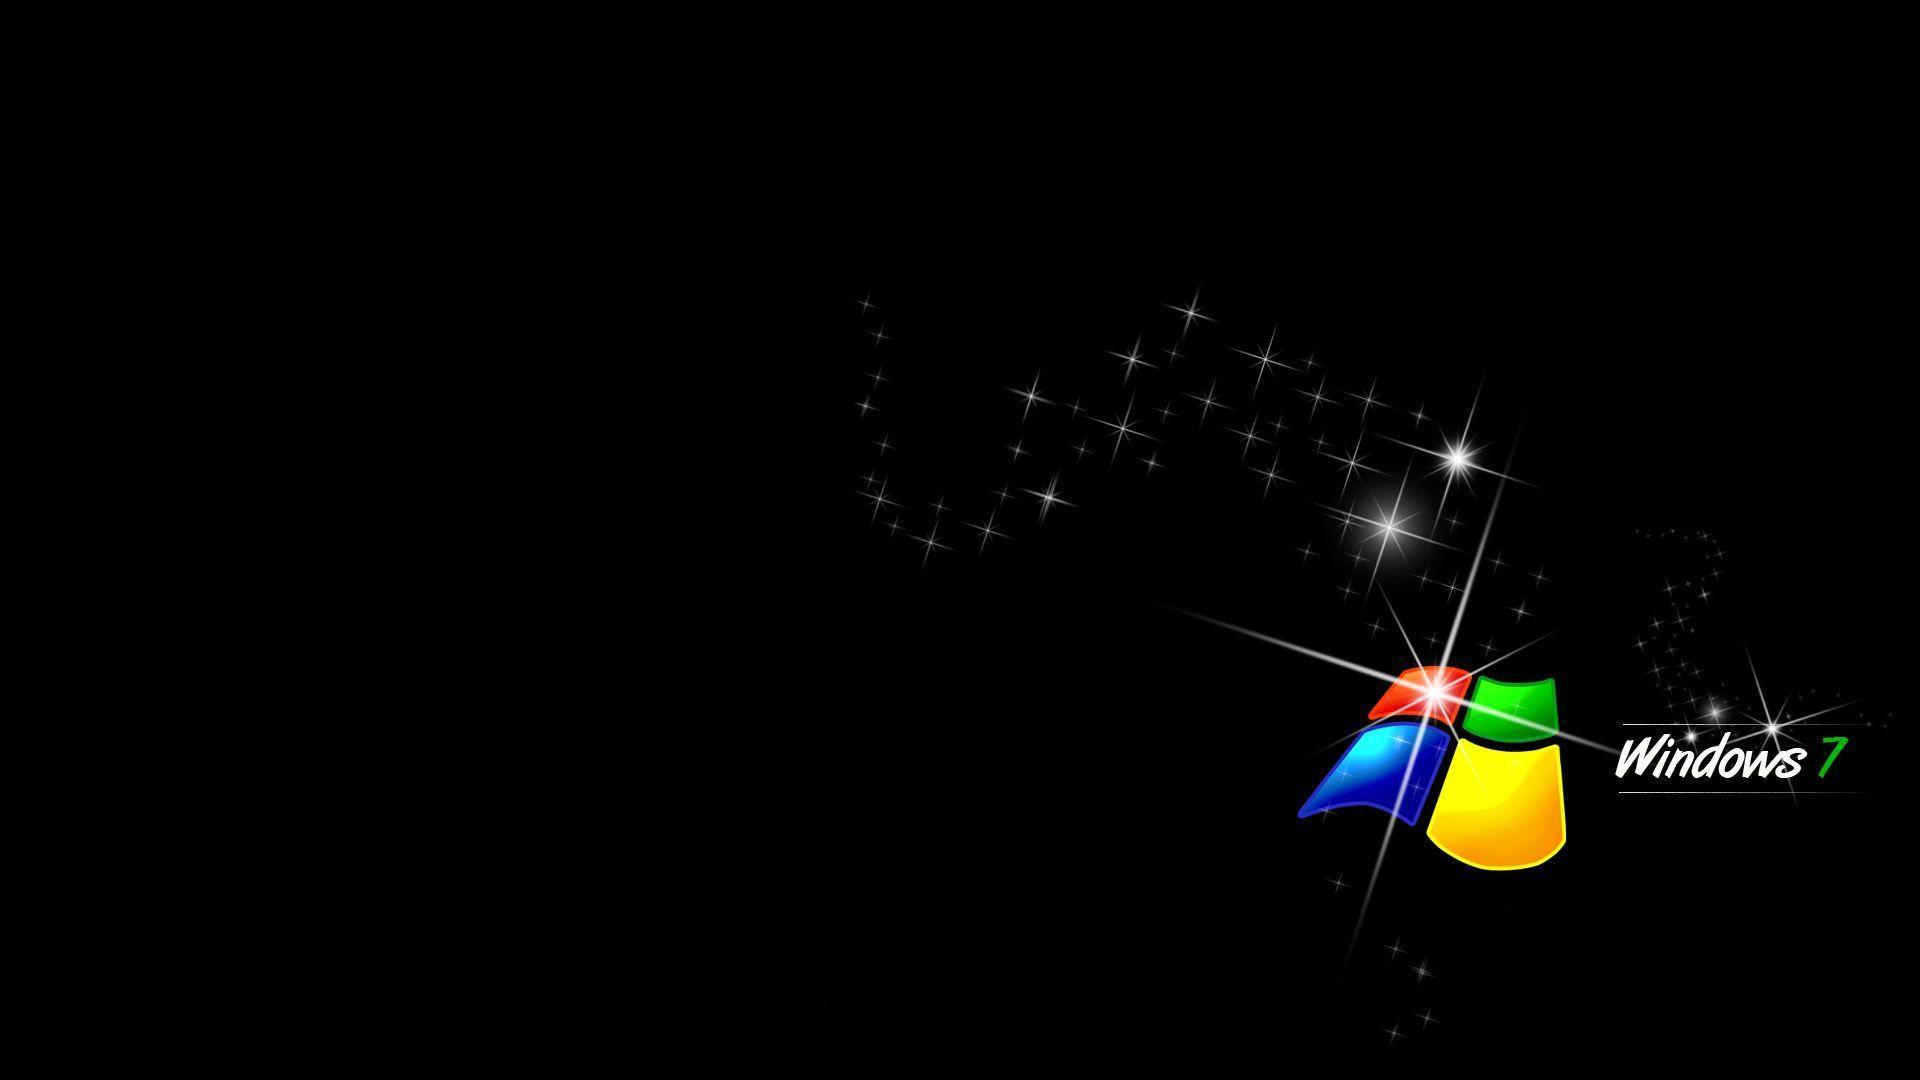 Black Backgrounds Windows 7 Wallpaper, Image & Pictures